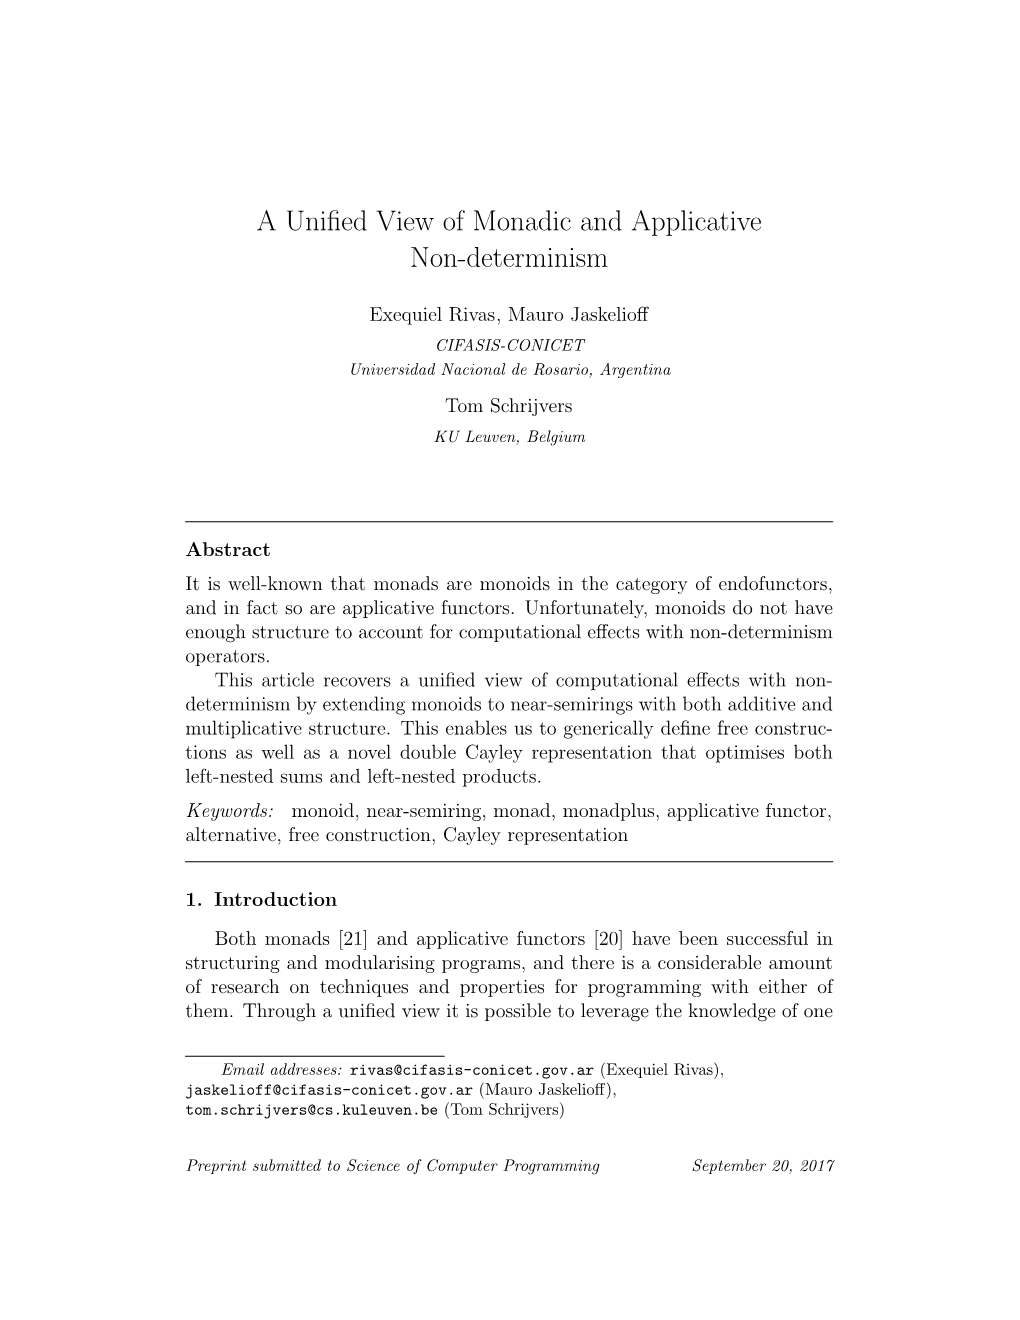 A Unified View of Monadic and Applicative Non-Determinism